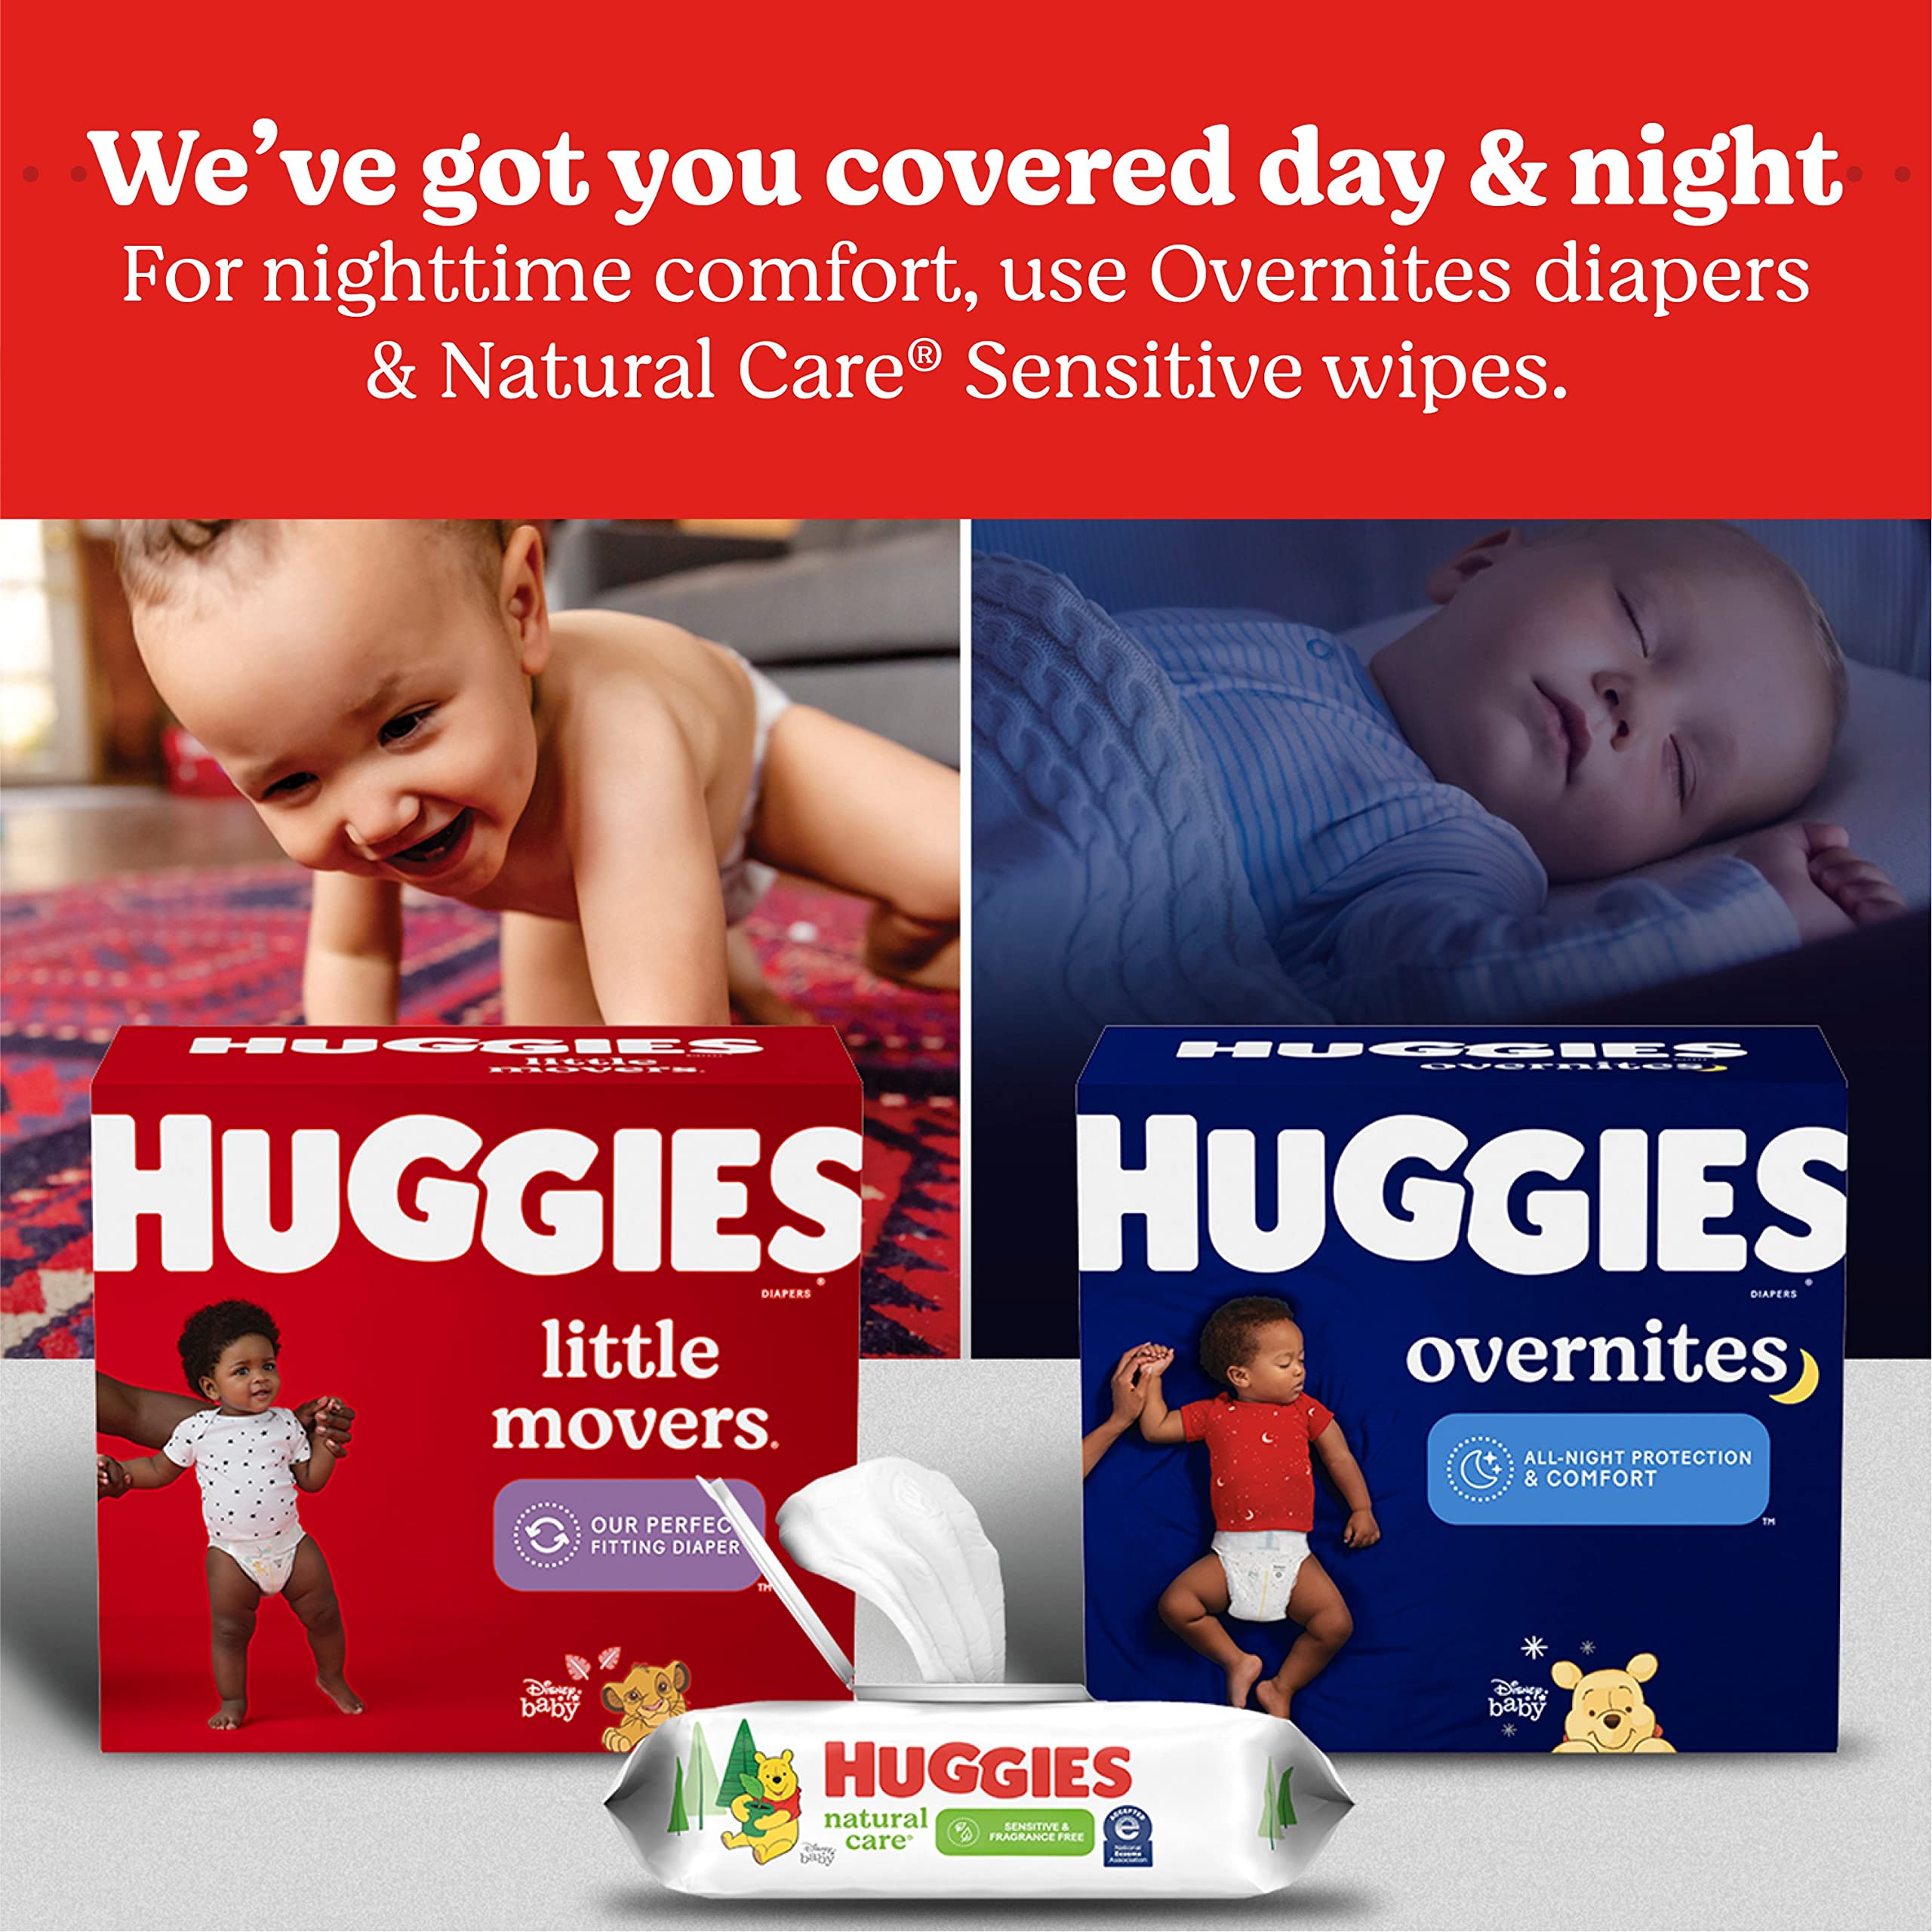 Huggies Little Movers Baby Diapers, Size 4 (22-37 lbs), 140 Ct- 70 Count(Pack of 2)